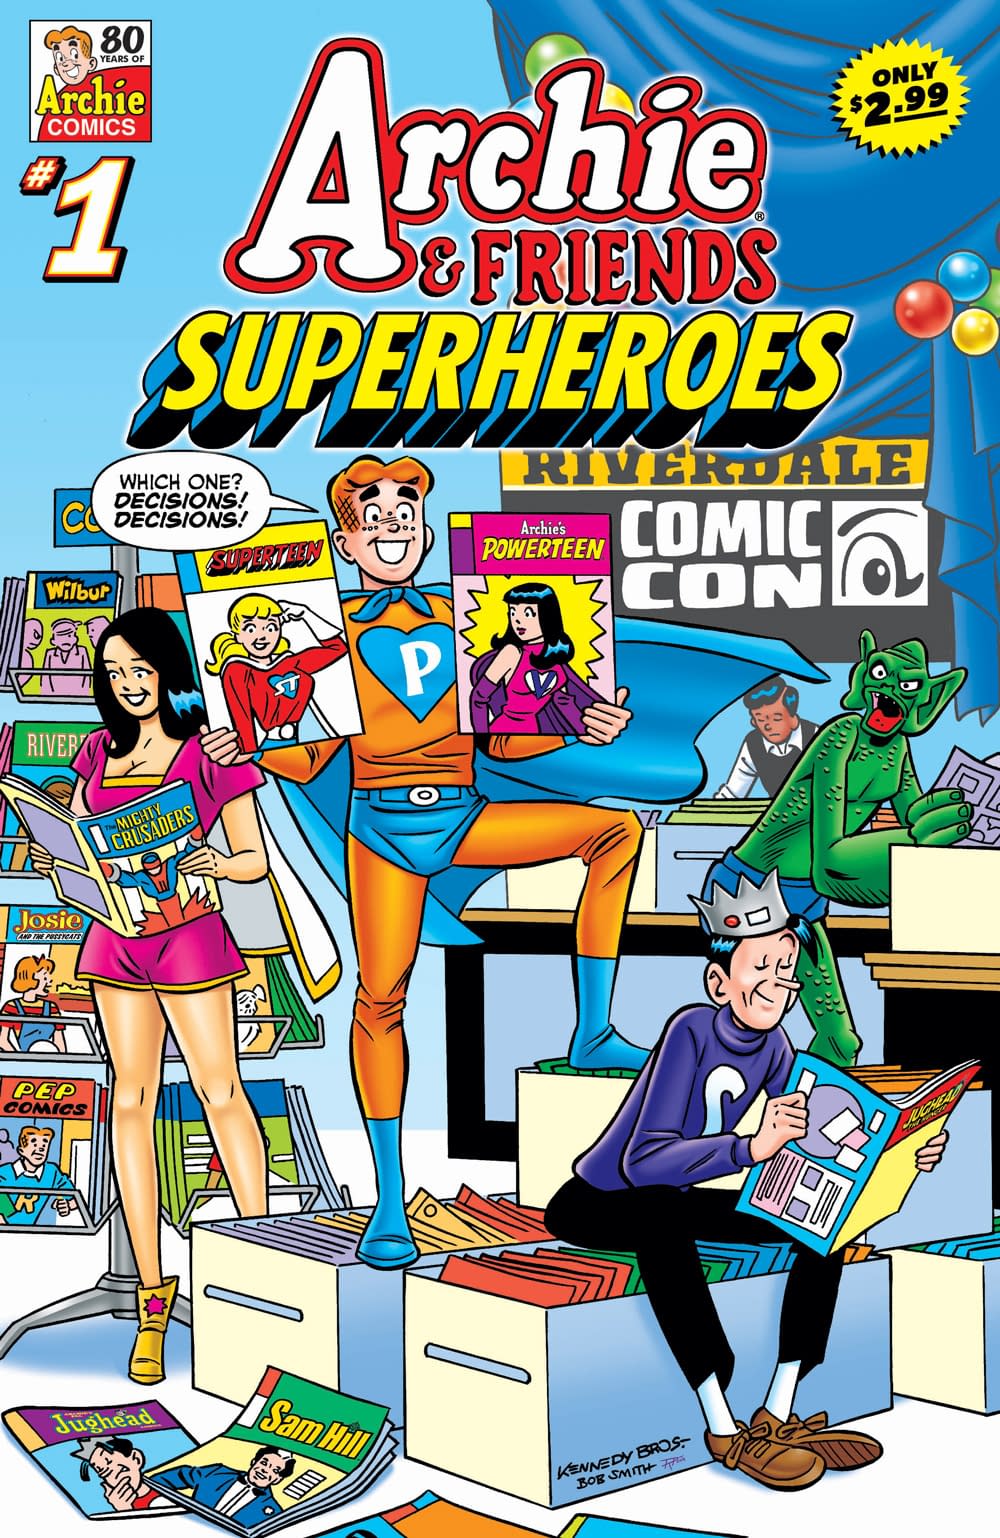 Archie & Friends: Superheroes in Archie Comics May 2021 Solicits